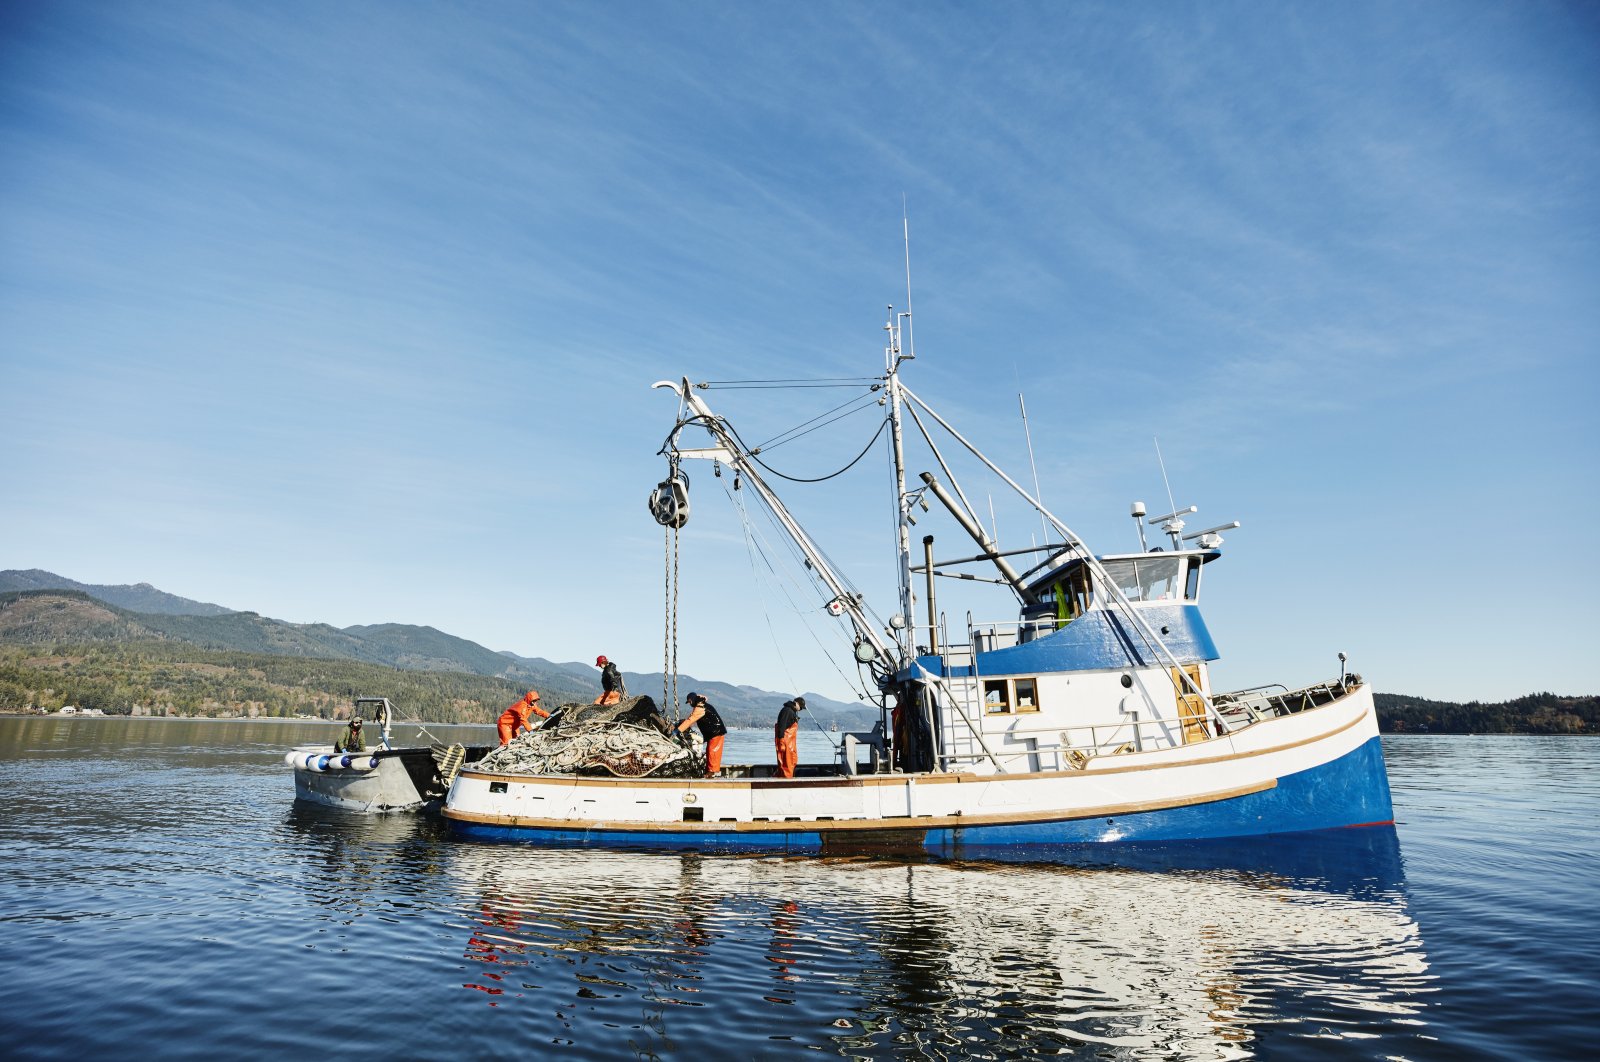 Crew on purse seiner organizing gear while fishing for salmon on fall morning. (Getty Images)